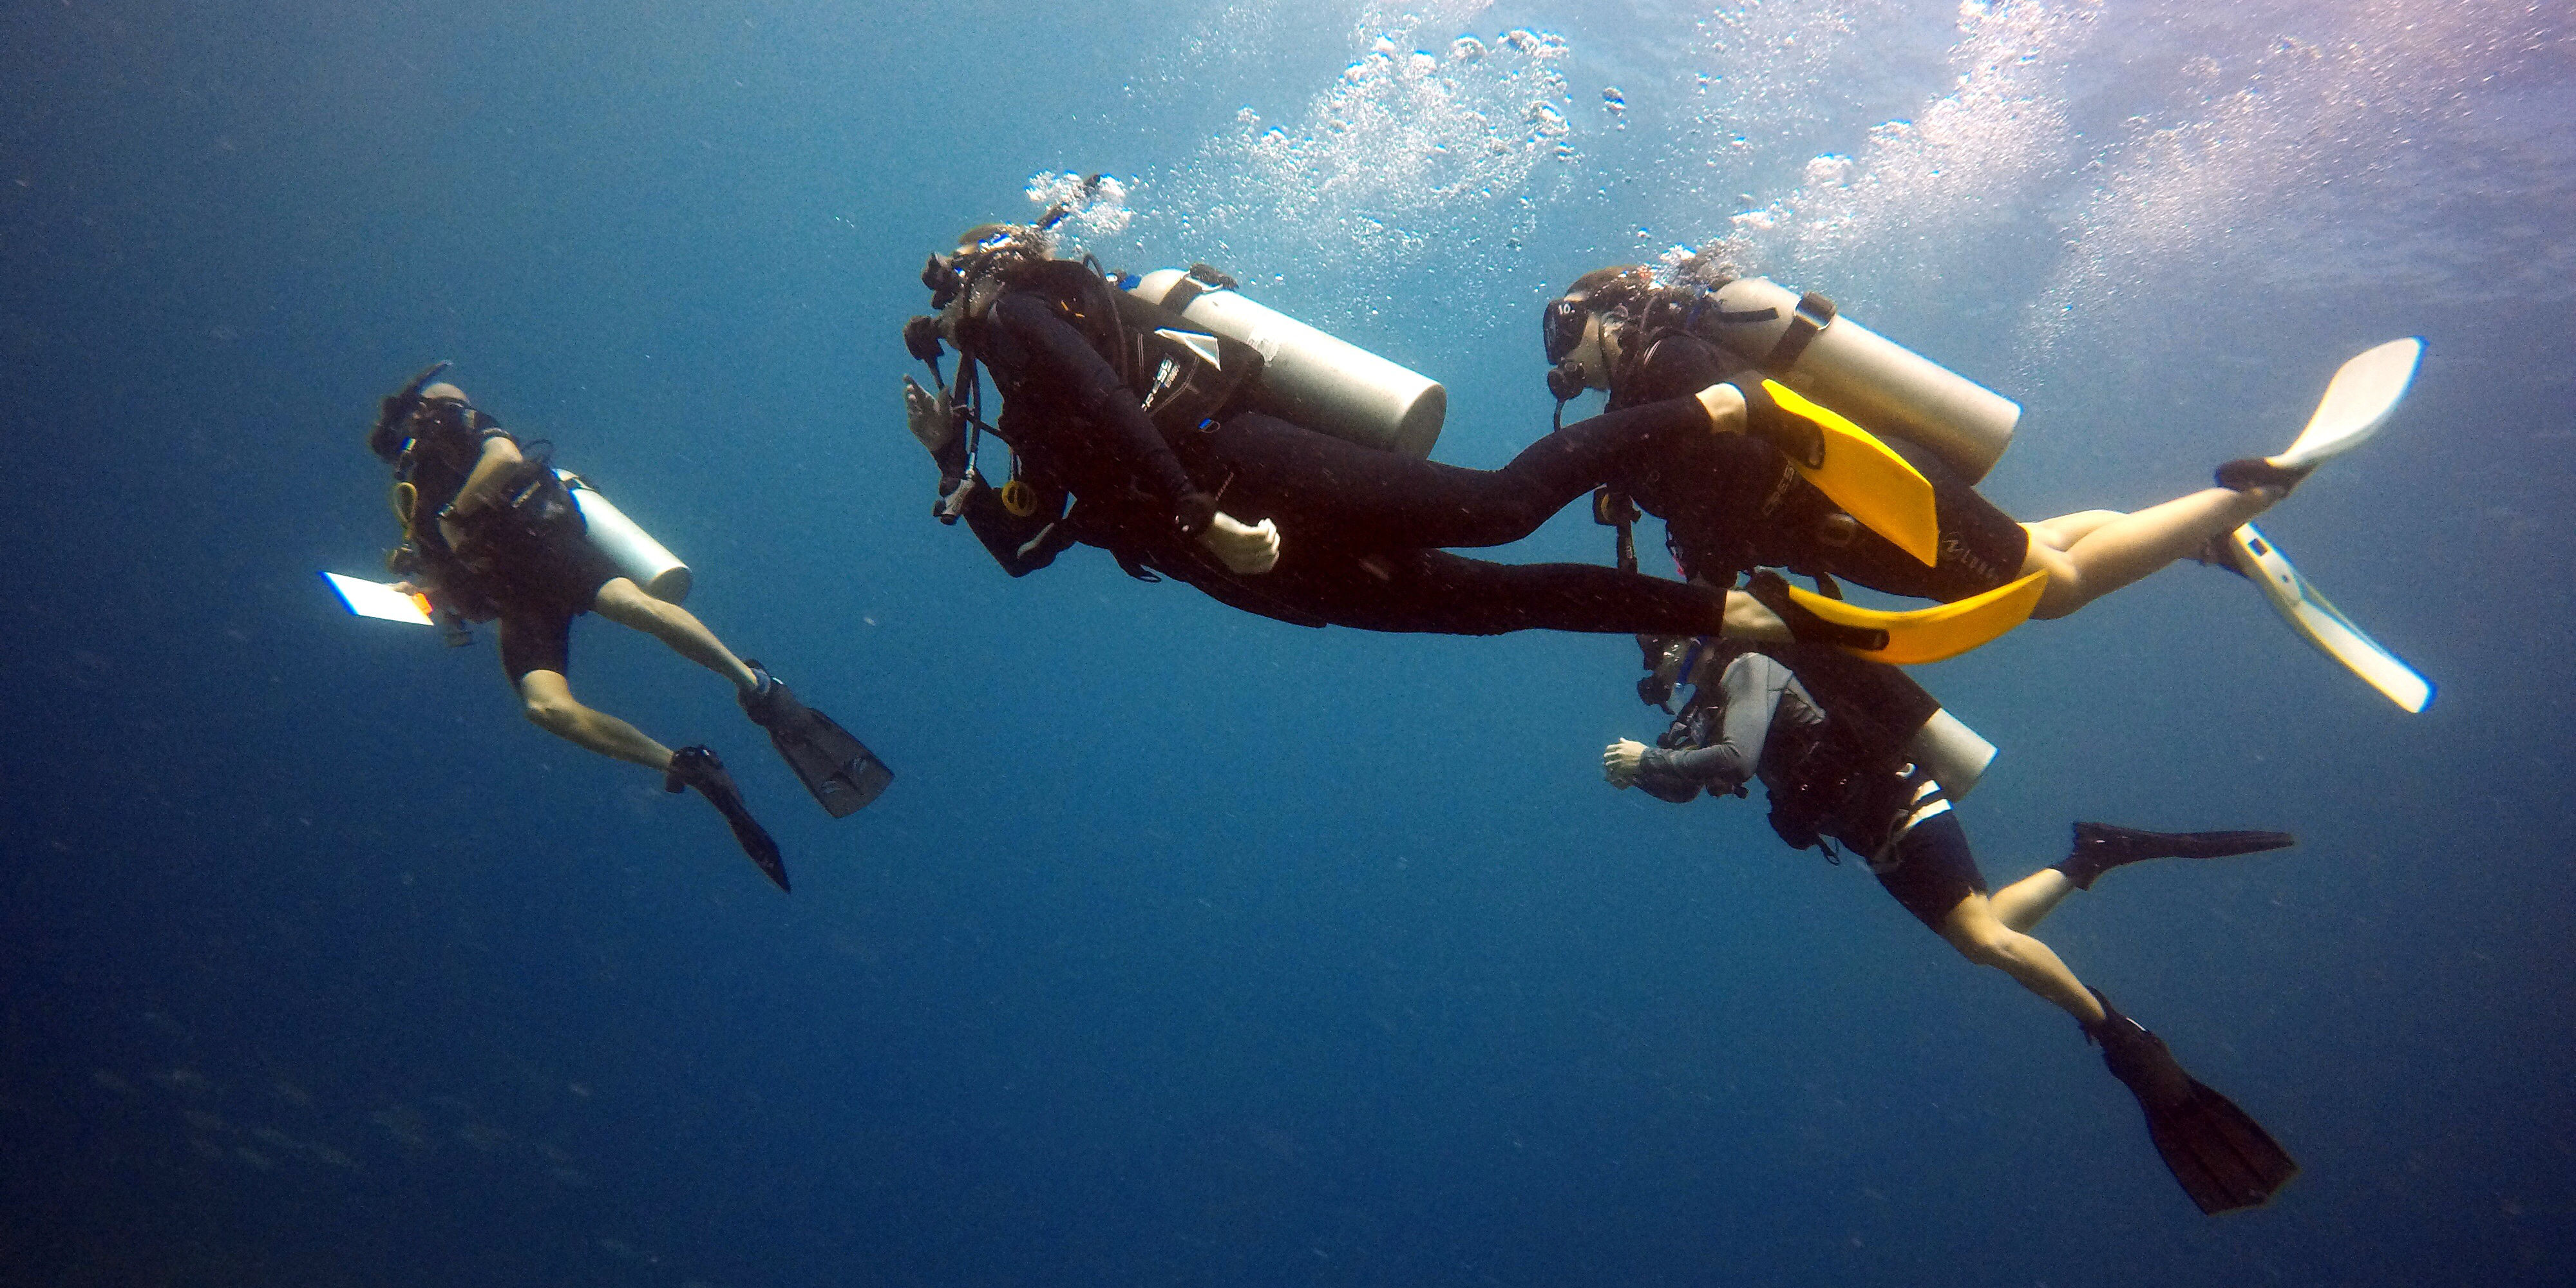 While taking a gap year, GVI participants learn diving skills in Mahe, Seychelles.